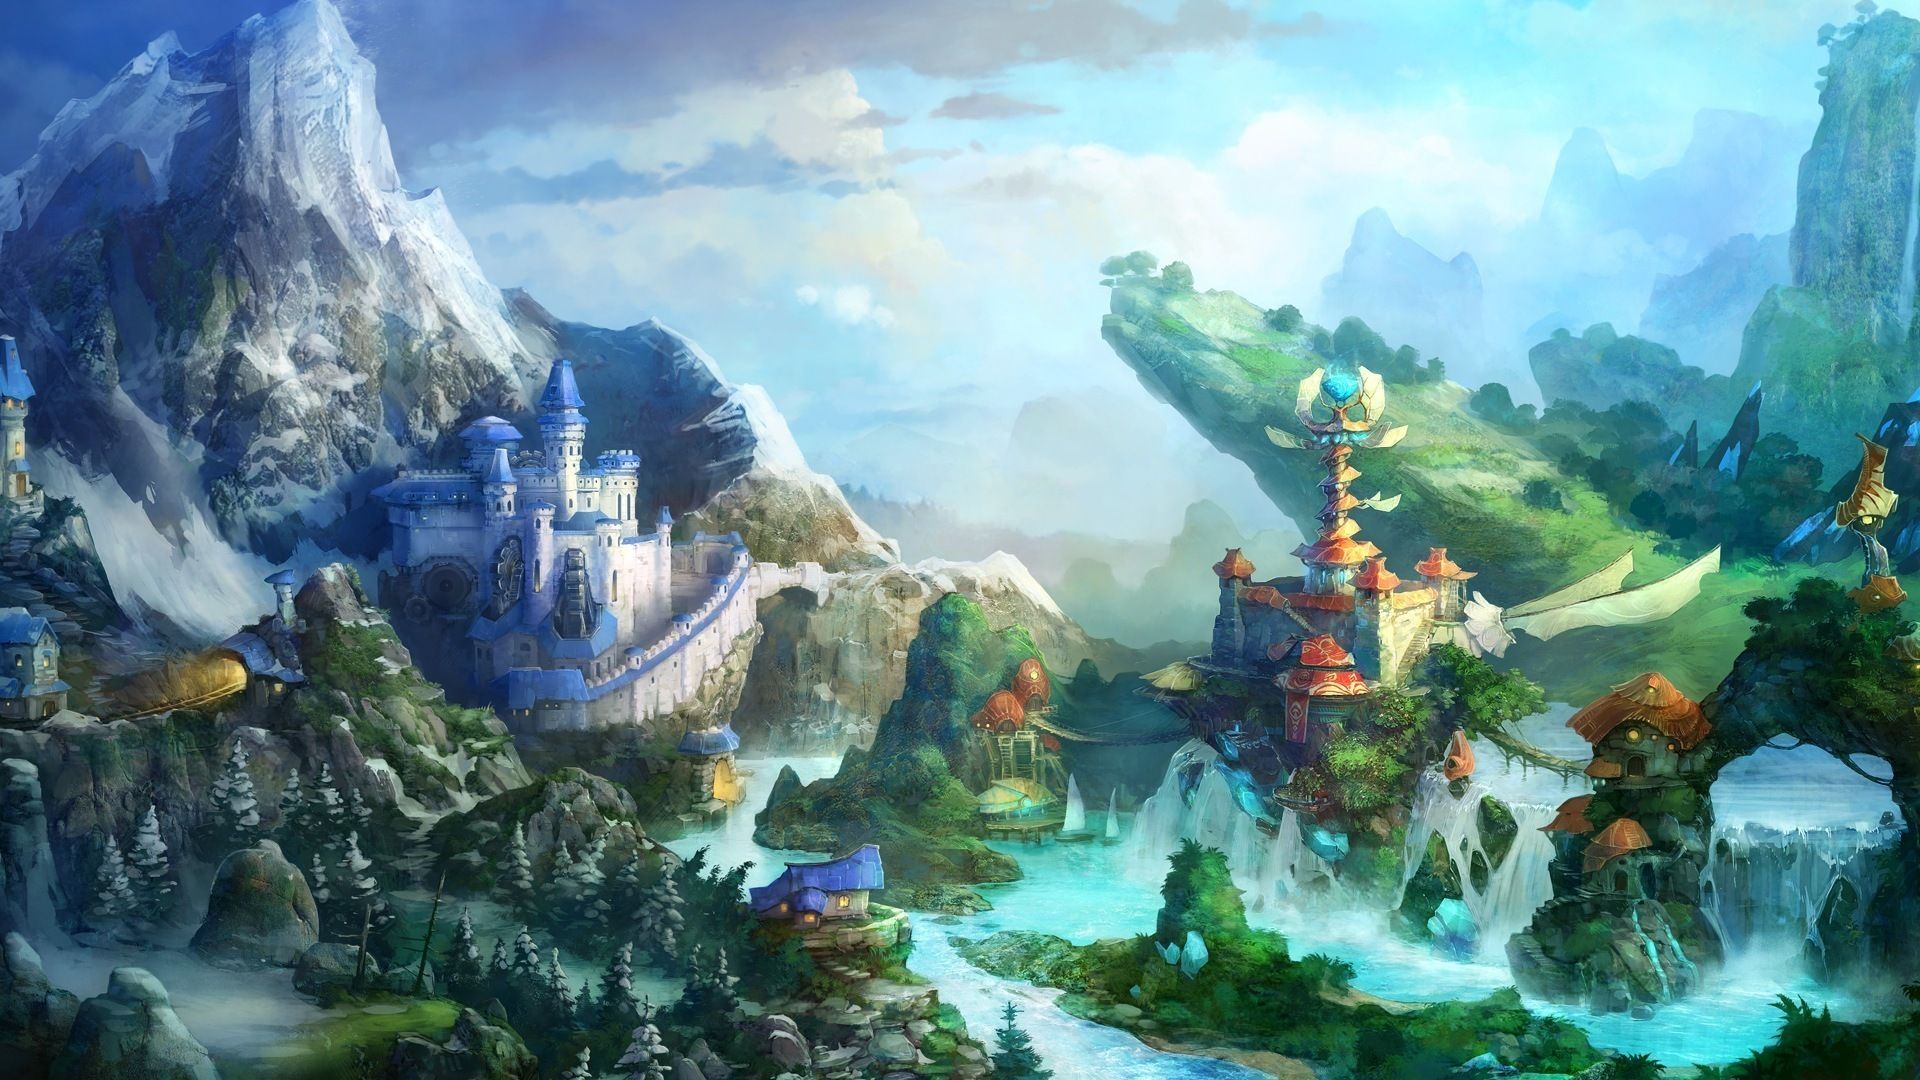 Video Game Scenery Wallpapers